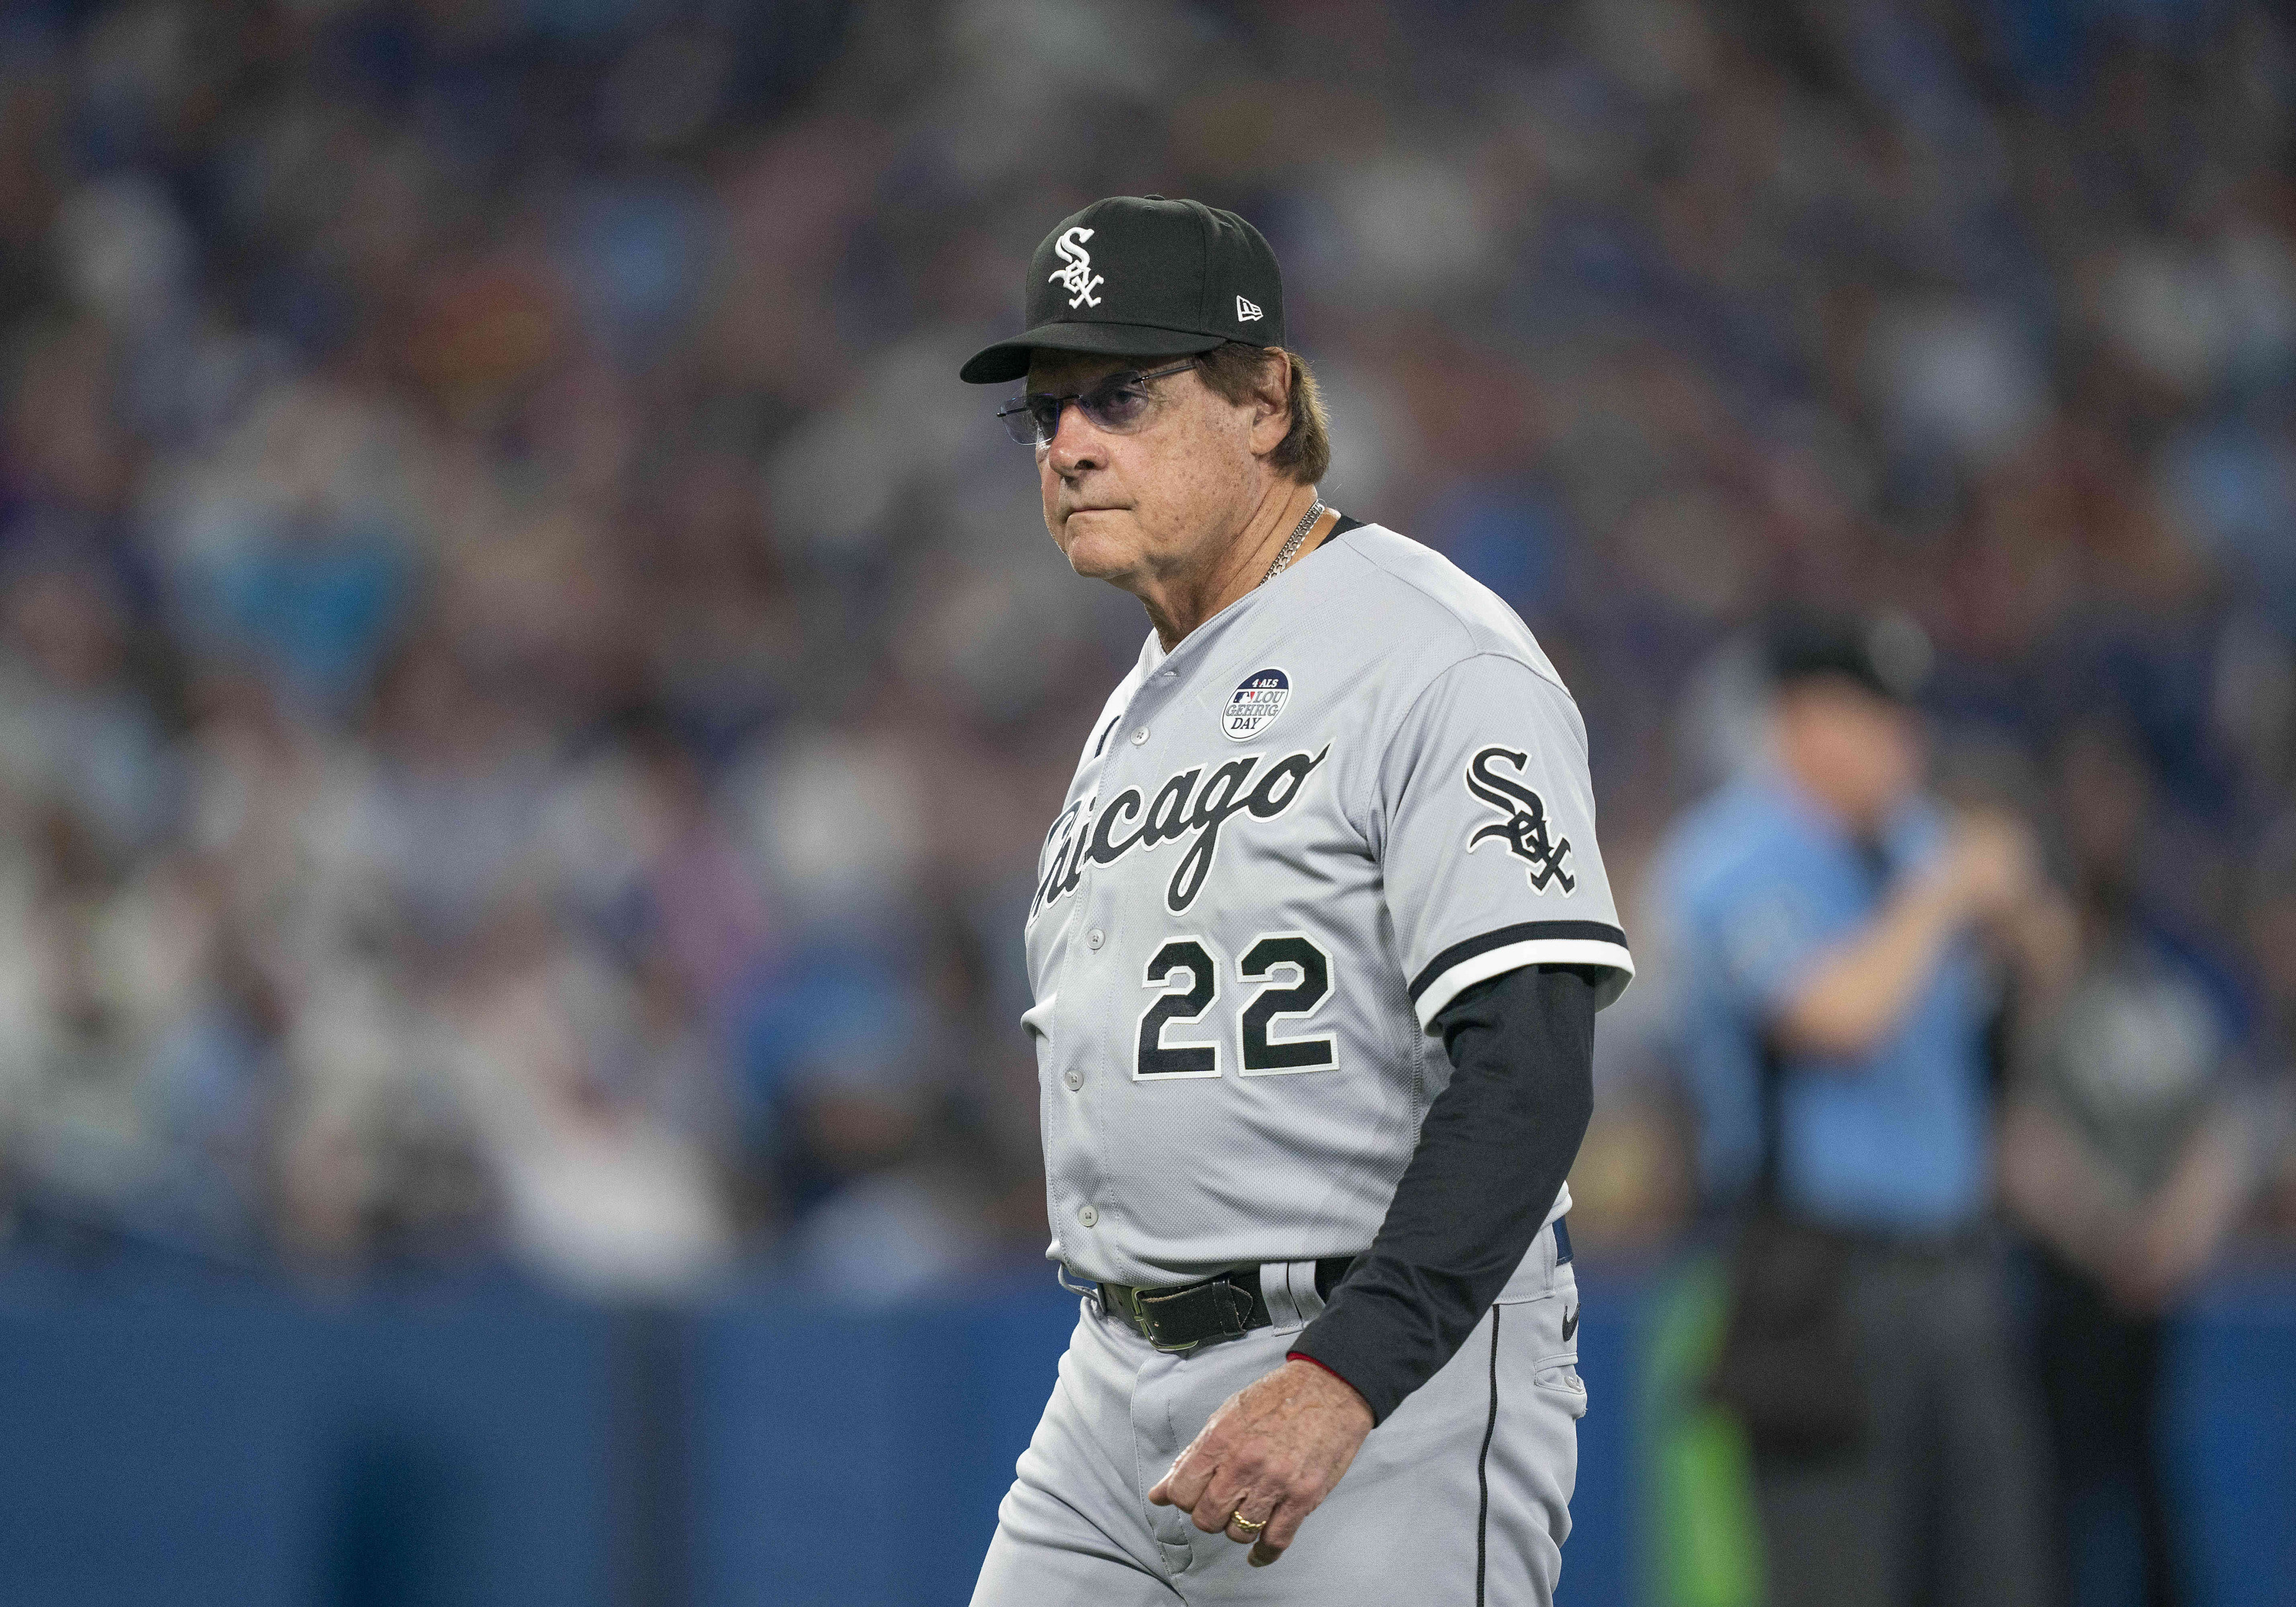 Do not expect the Chicago White Sox to fire Tony La Russa anytime soon